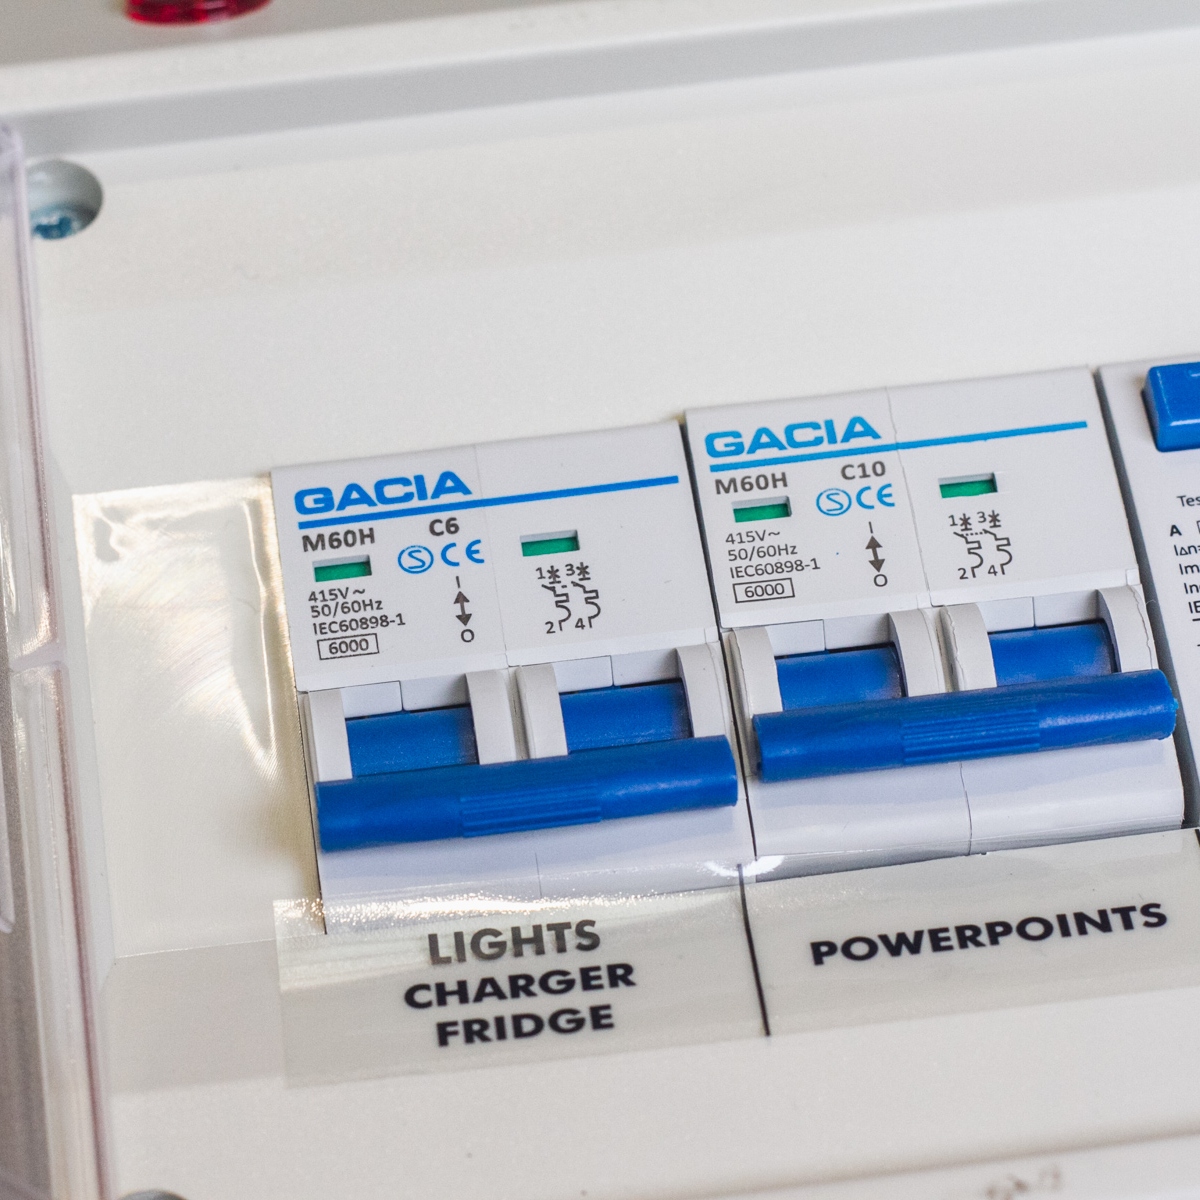 Close-up of a Consumer Unit - 25A RCD‚ 10A & 6A double pole MCB labeled "Lights Charger Fridge" and "Powerpoints" with blue switches, brand "Gacia".